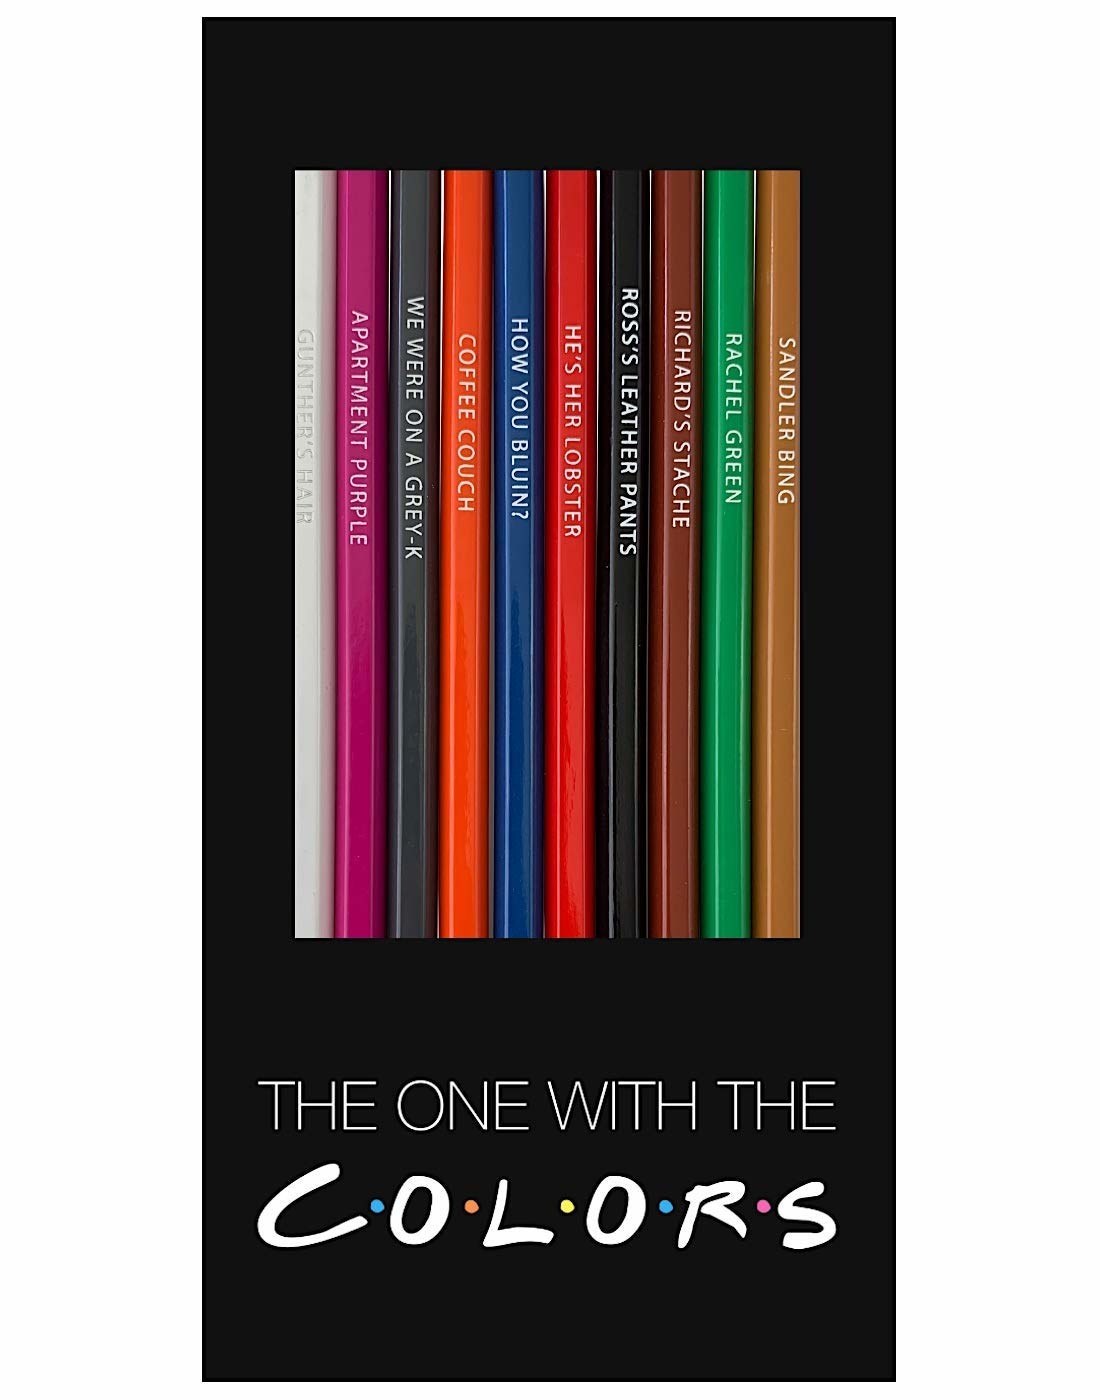 a package of colored pencils with memorable things from the show etched into them